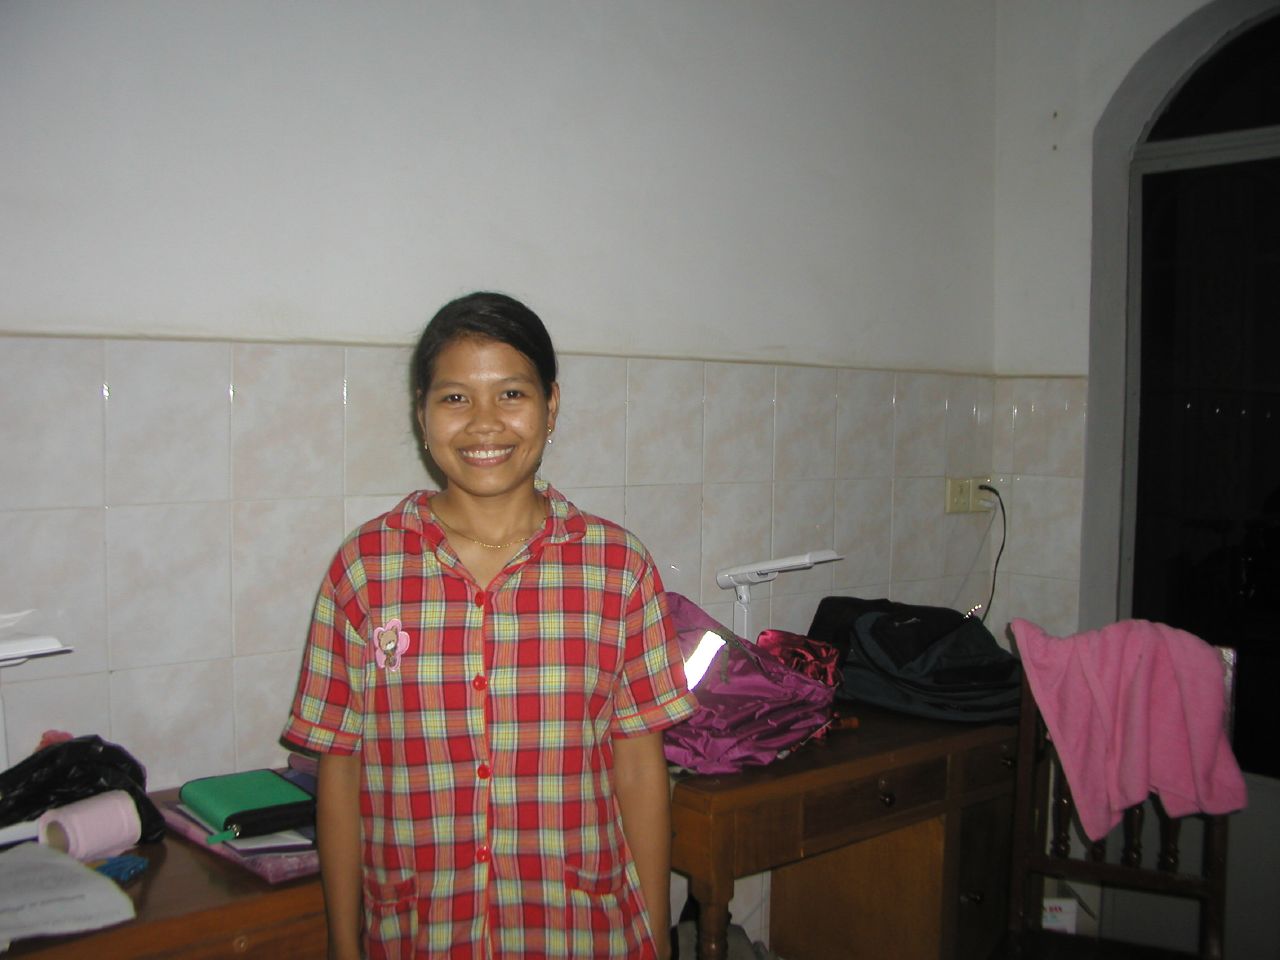 a girl is smiling and posing for the camera